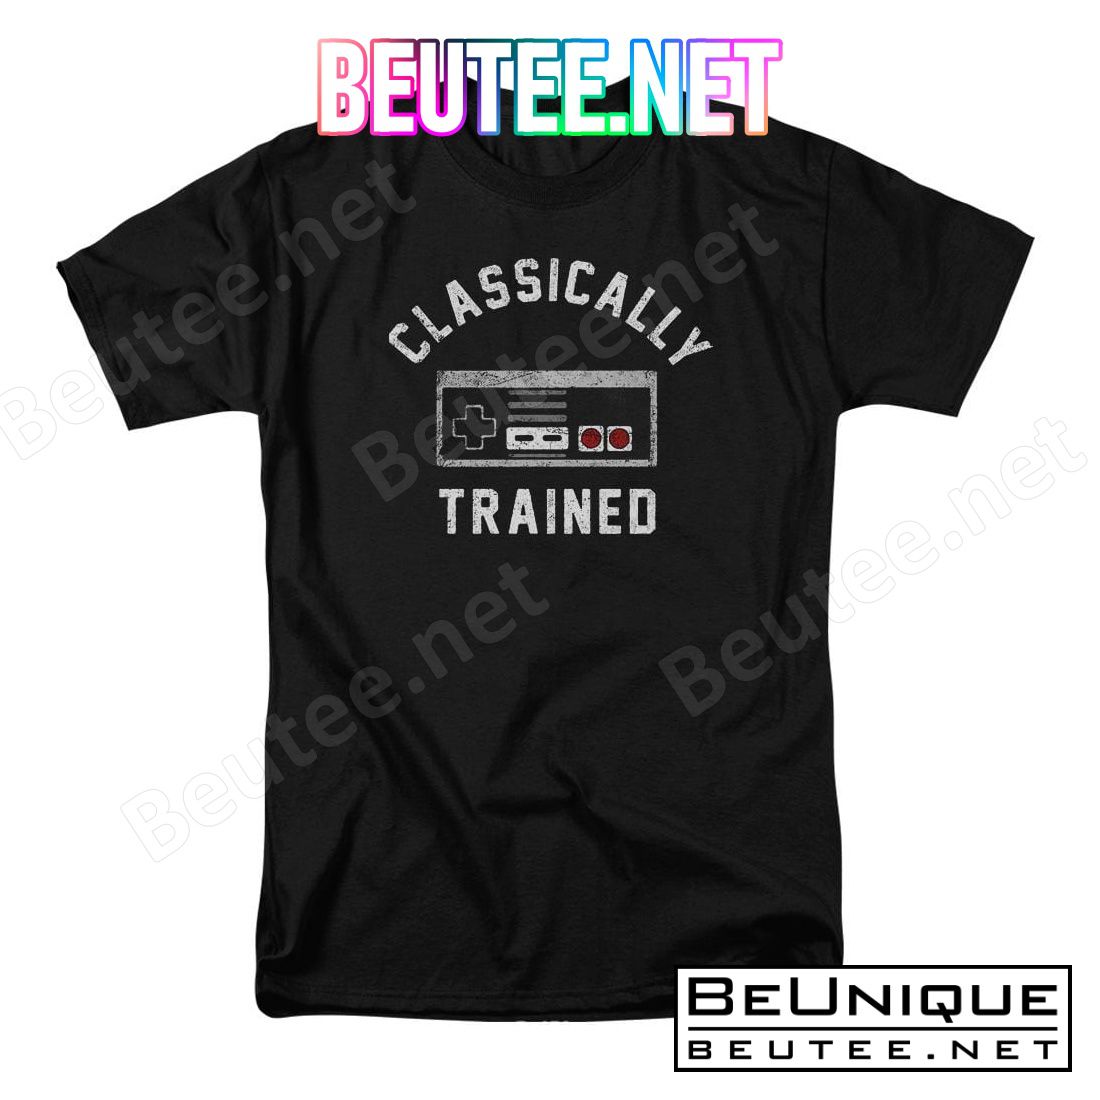 Classically Trained Shirt